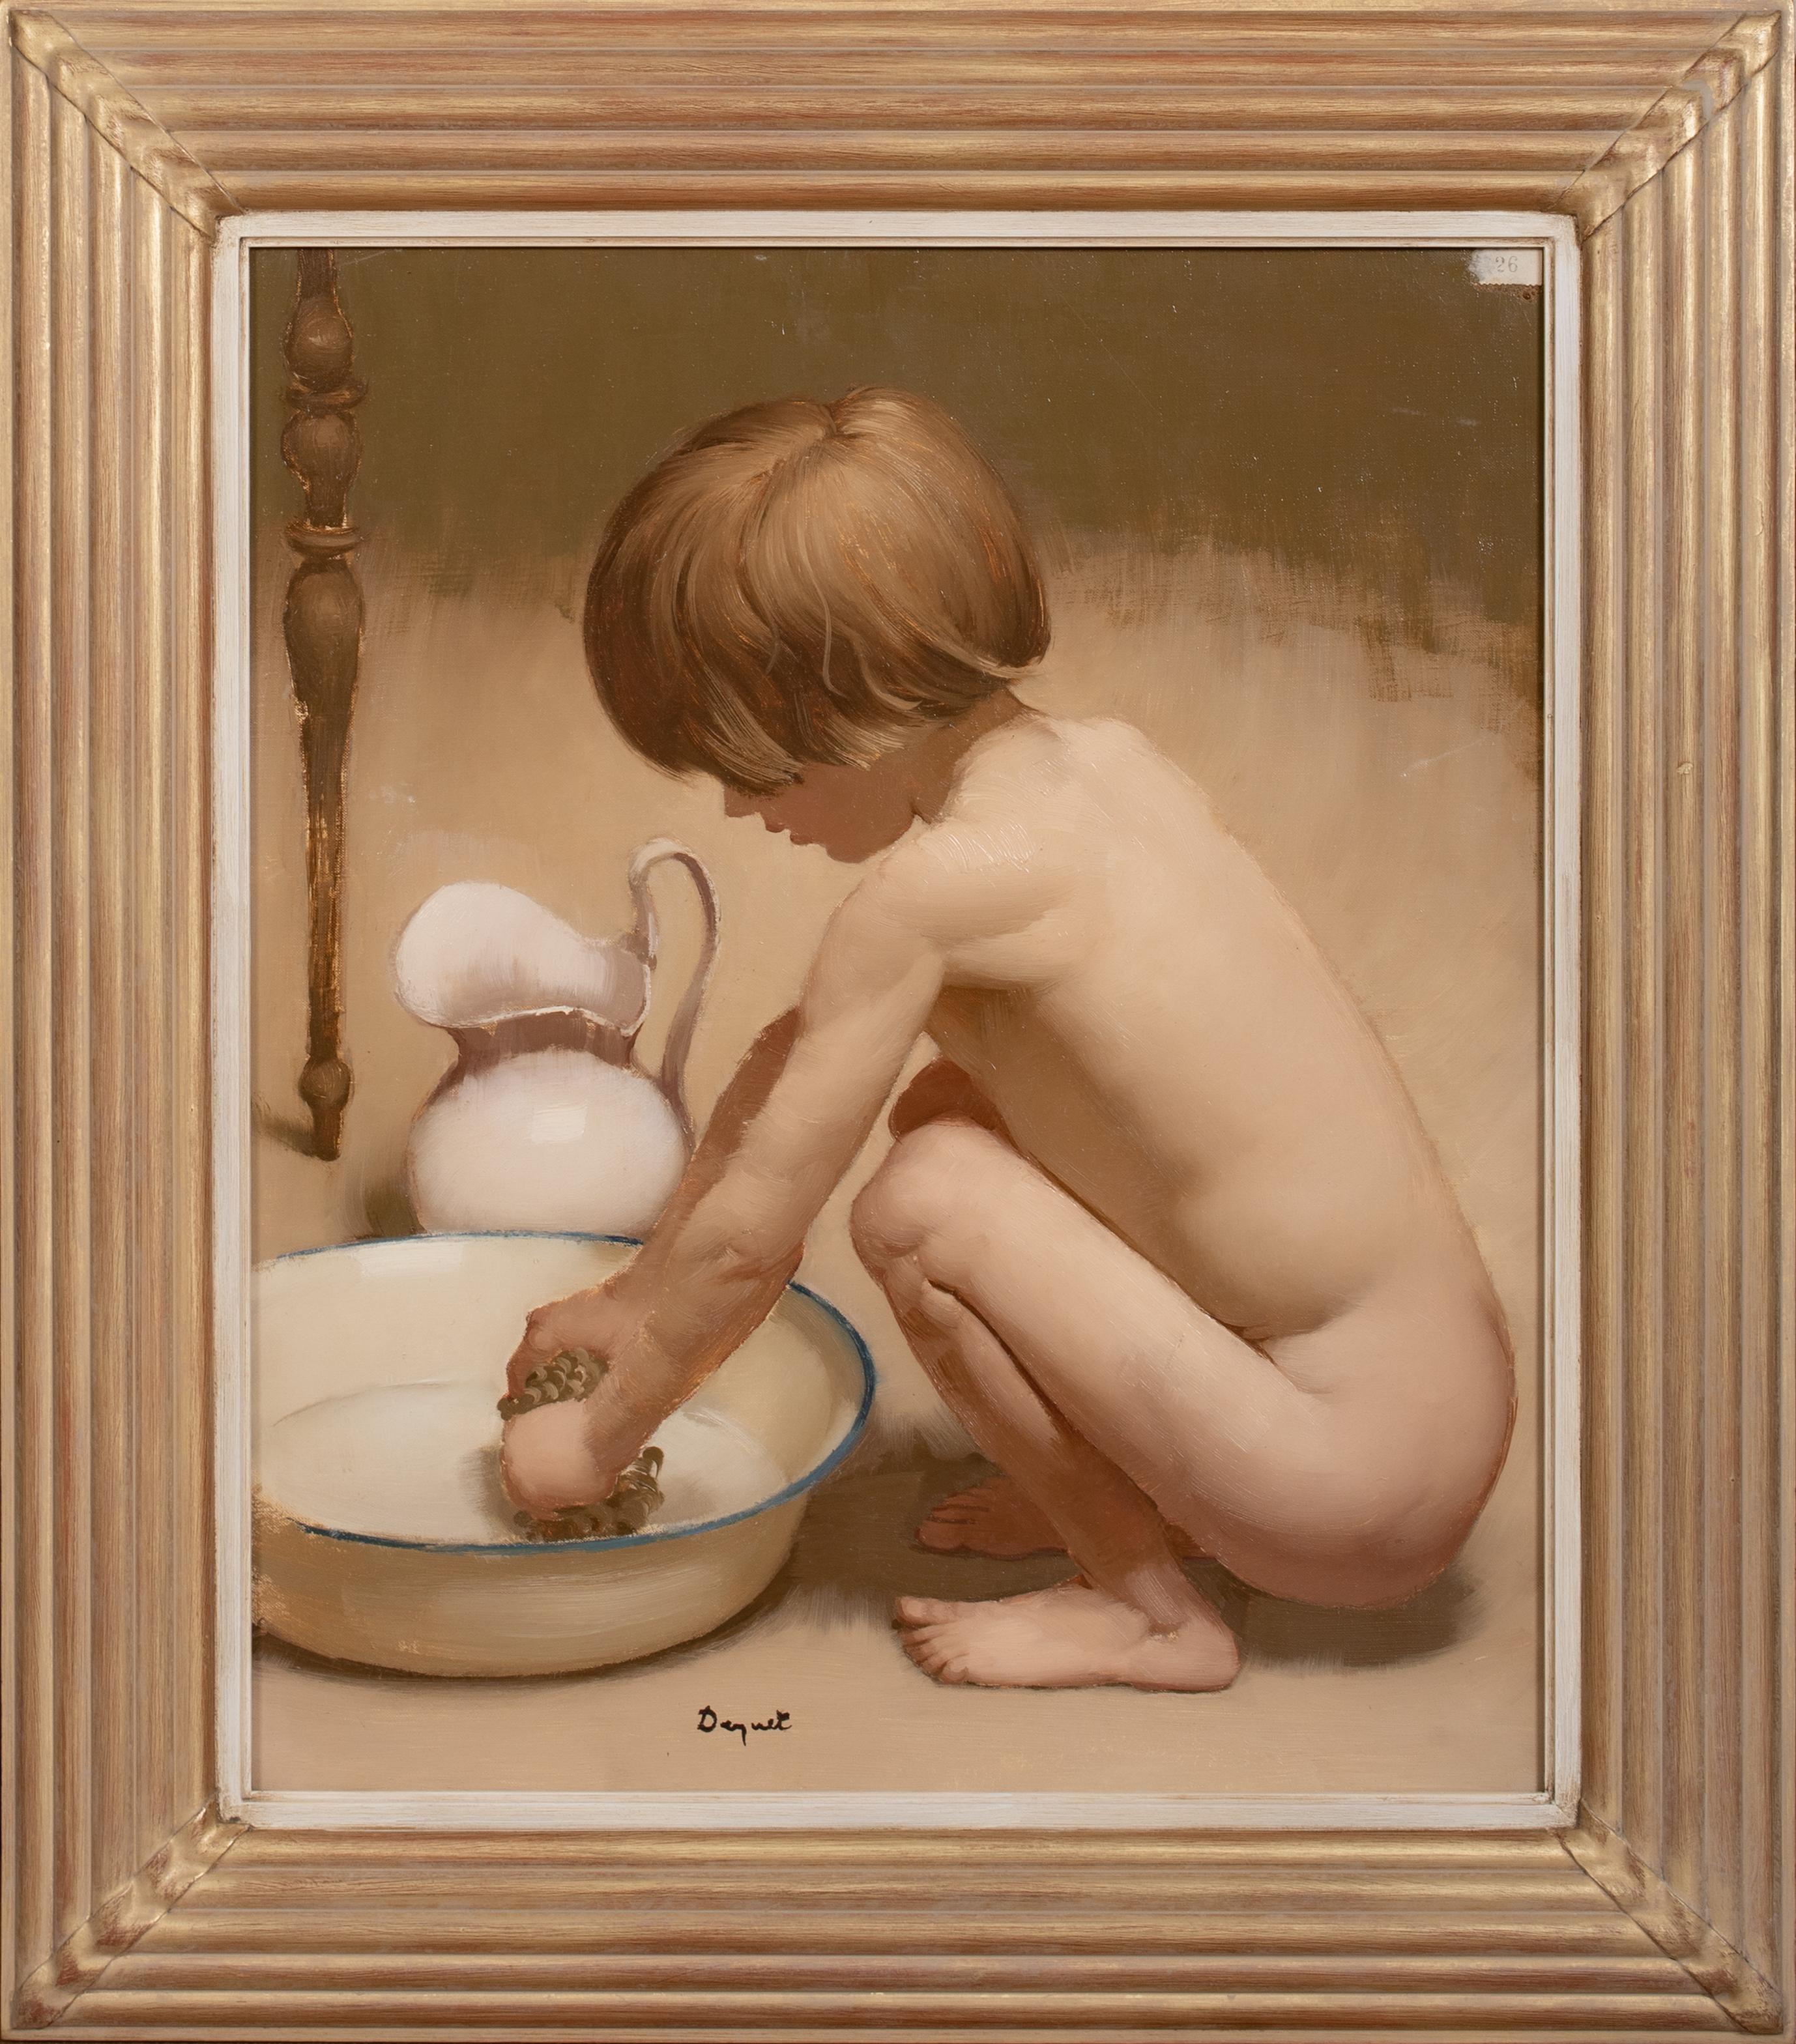 Unknown Nude Painting - Nude Boy Bathing, early 20th Century  French School - signed indistinctly